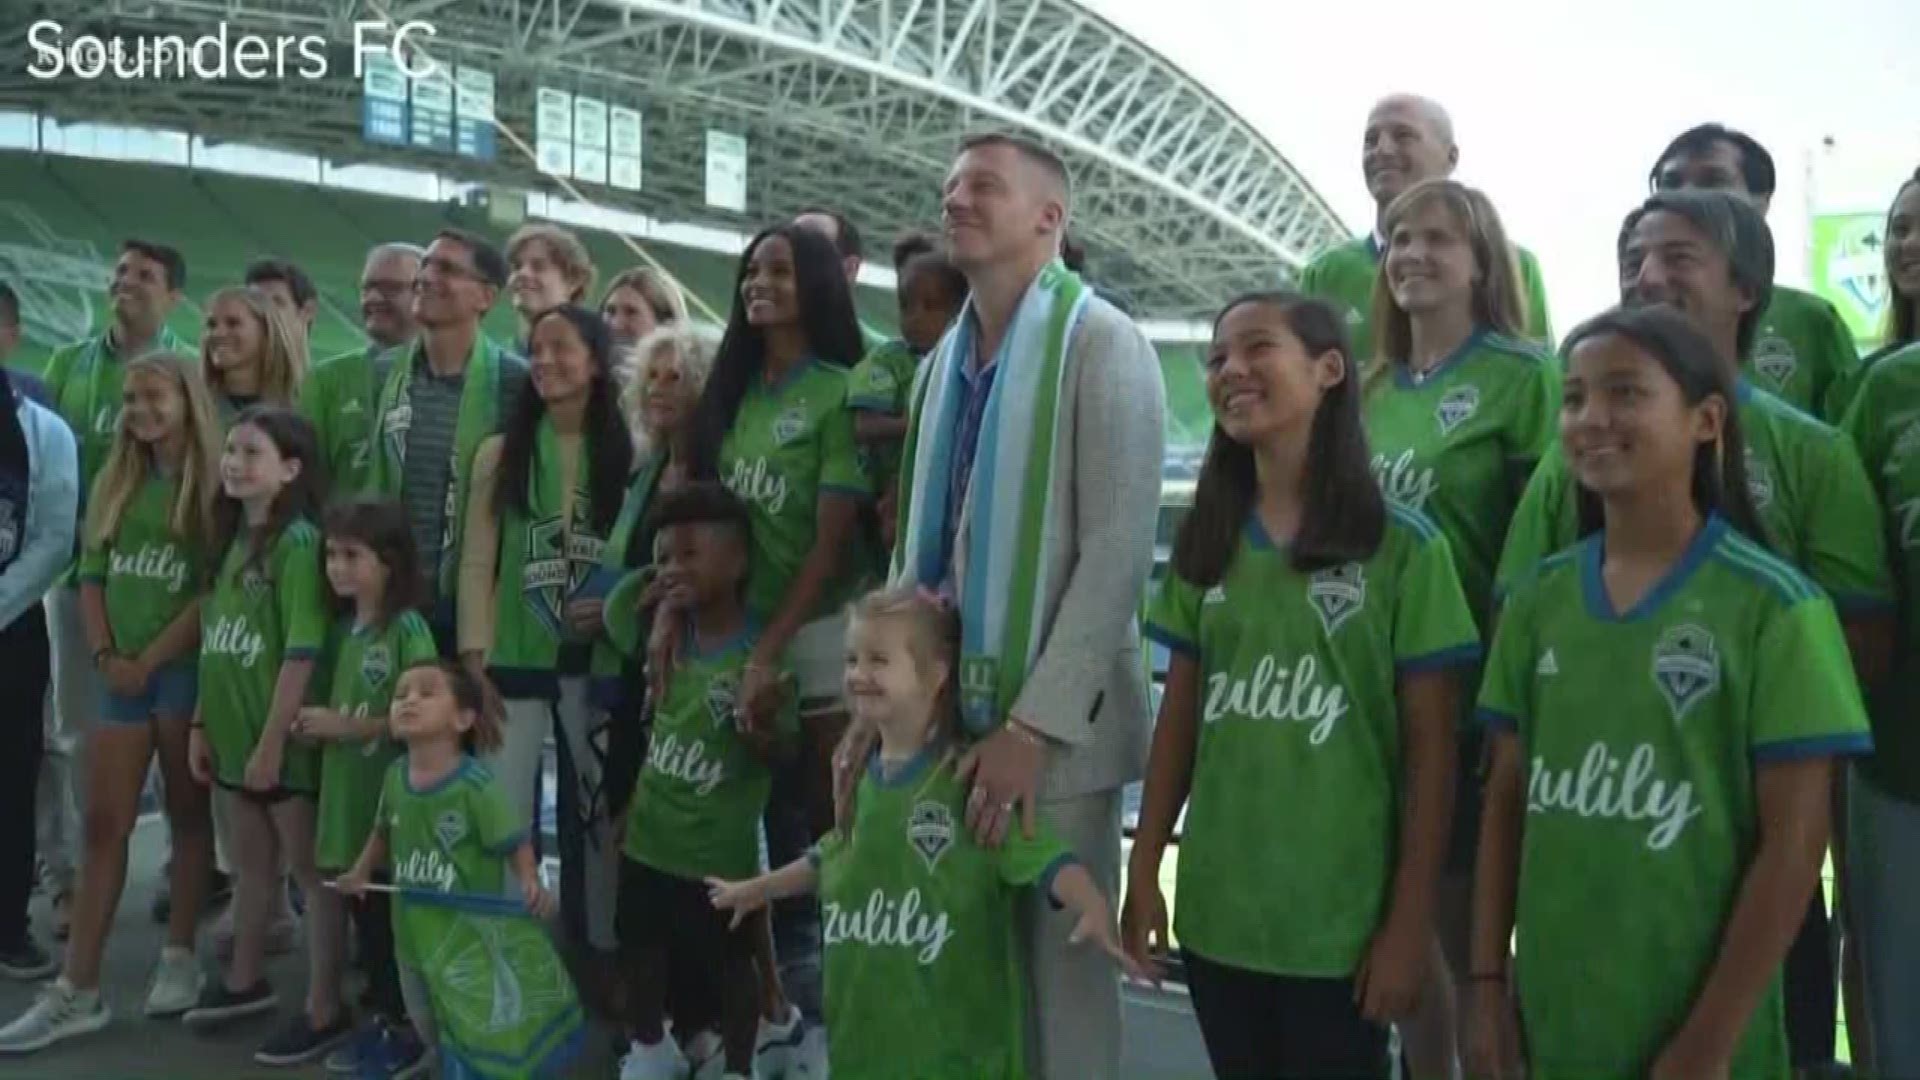 A group of well-known athletes, celebrities, and business people are investing in the Sounders' future.